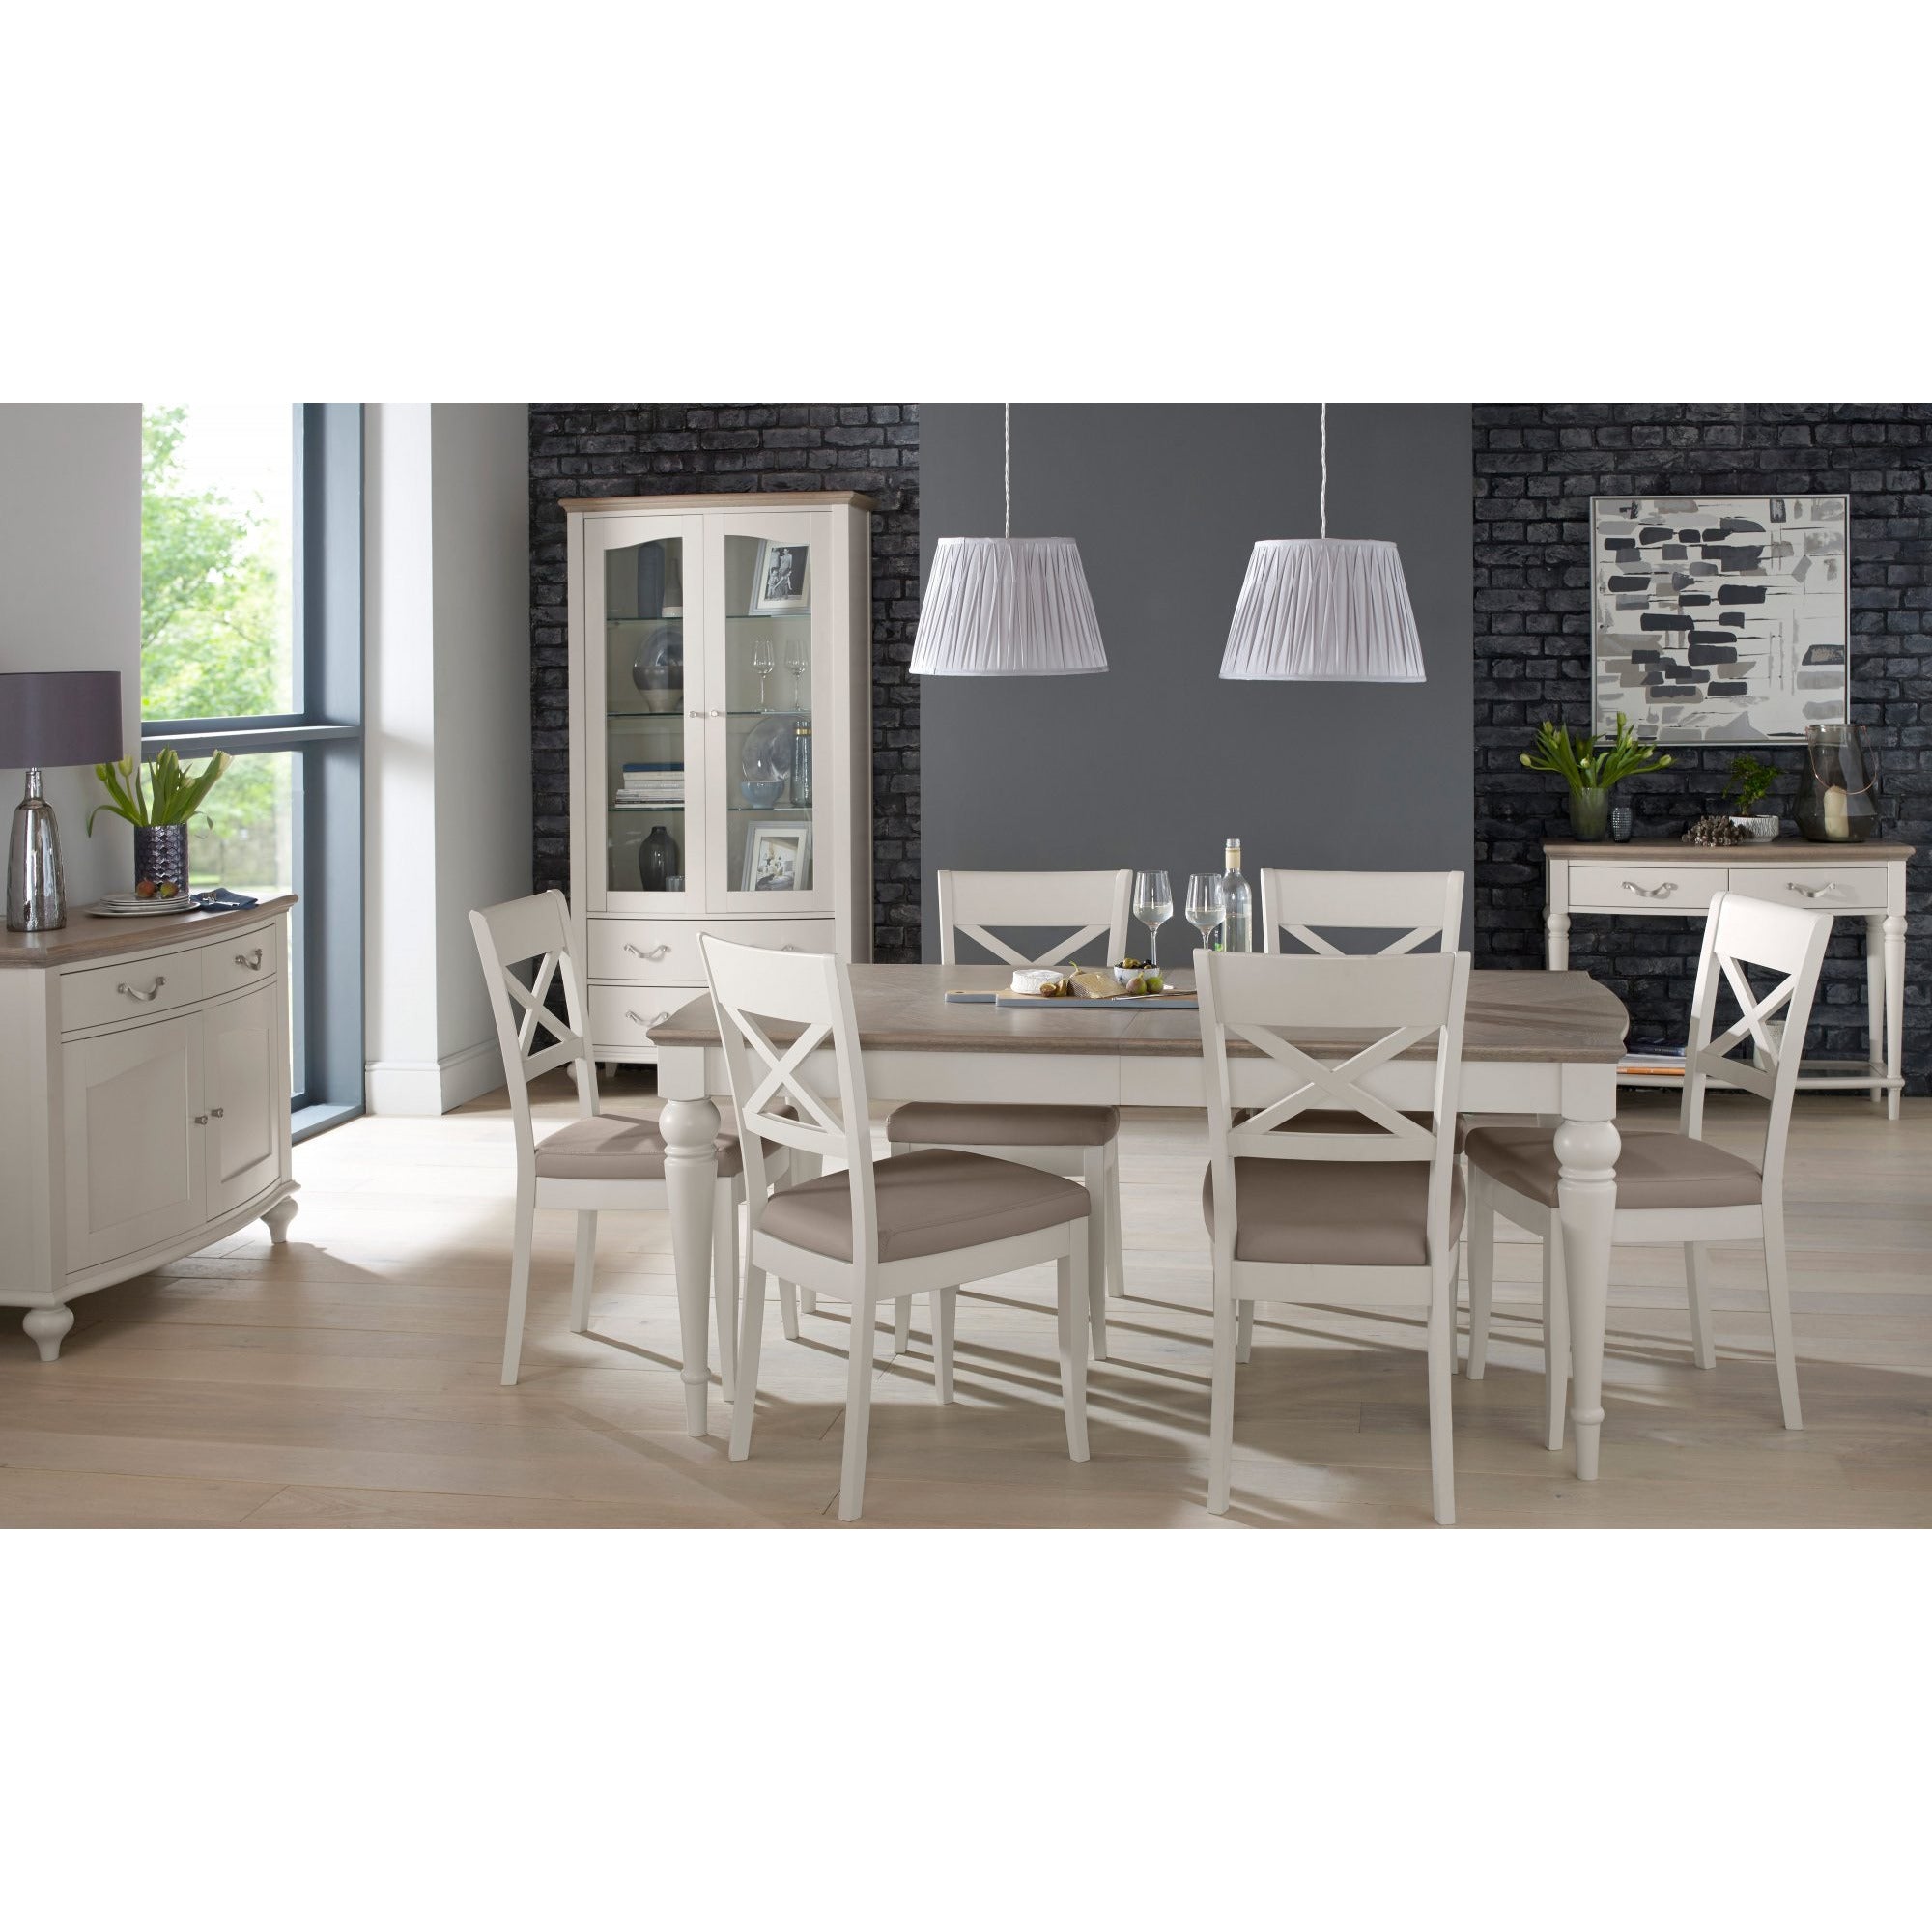 Montreux Large Extending Dining Table - Soft Grey from Upstairs Downstairs Furniture in Lisburn, Monaghan and Enniskillen